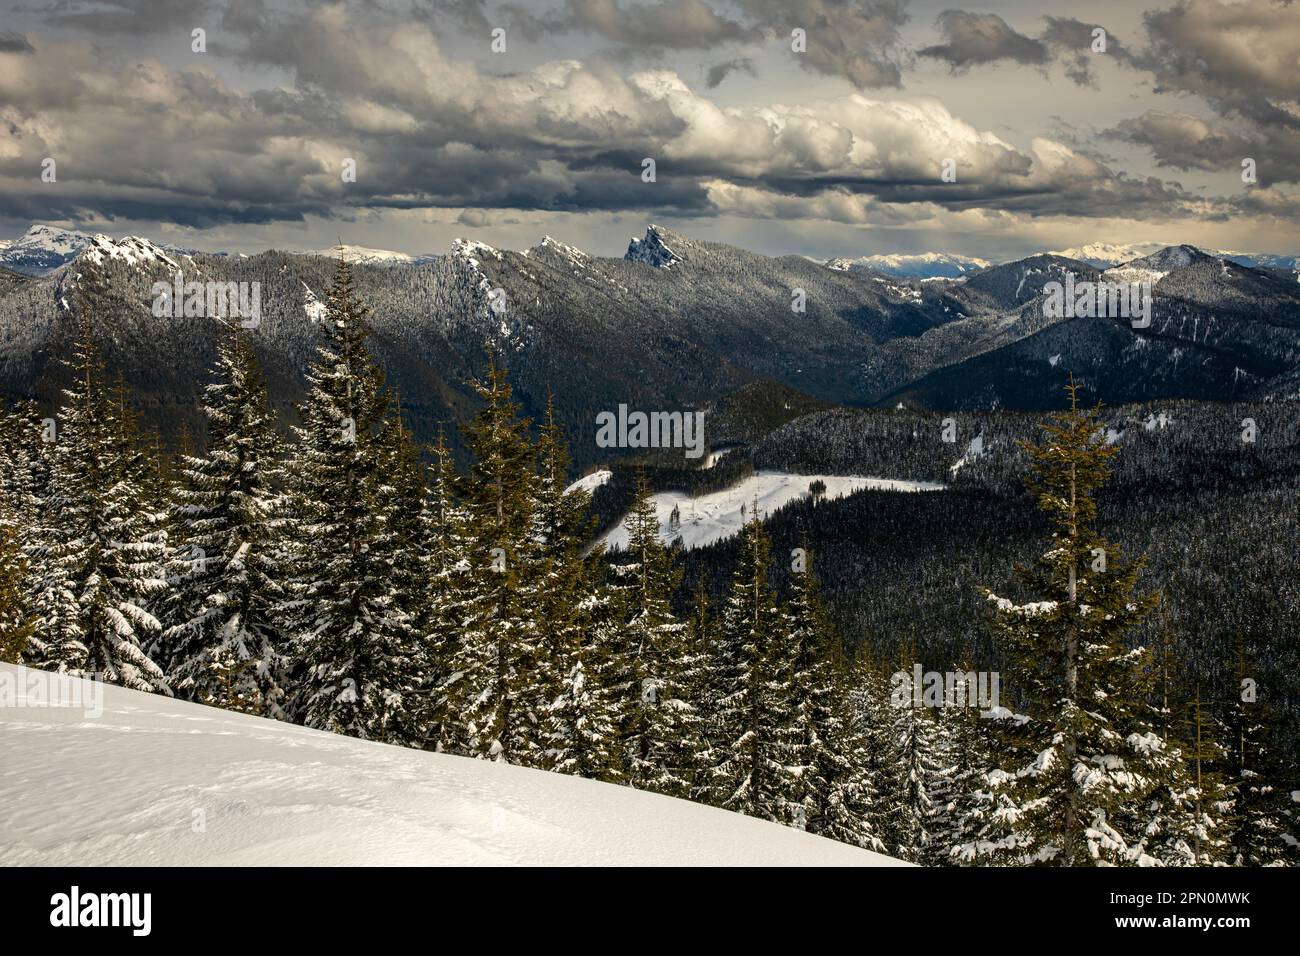 WA23349-00...WASHINGTON - View of High Rock Lookout from High Hut in the Mount Tahoma Trails near Mount Rainier. Stock Photo